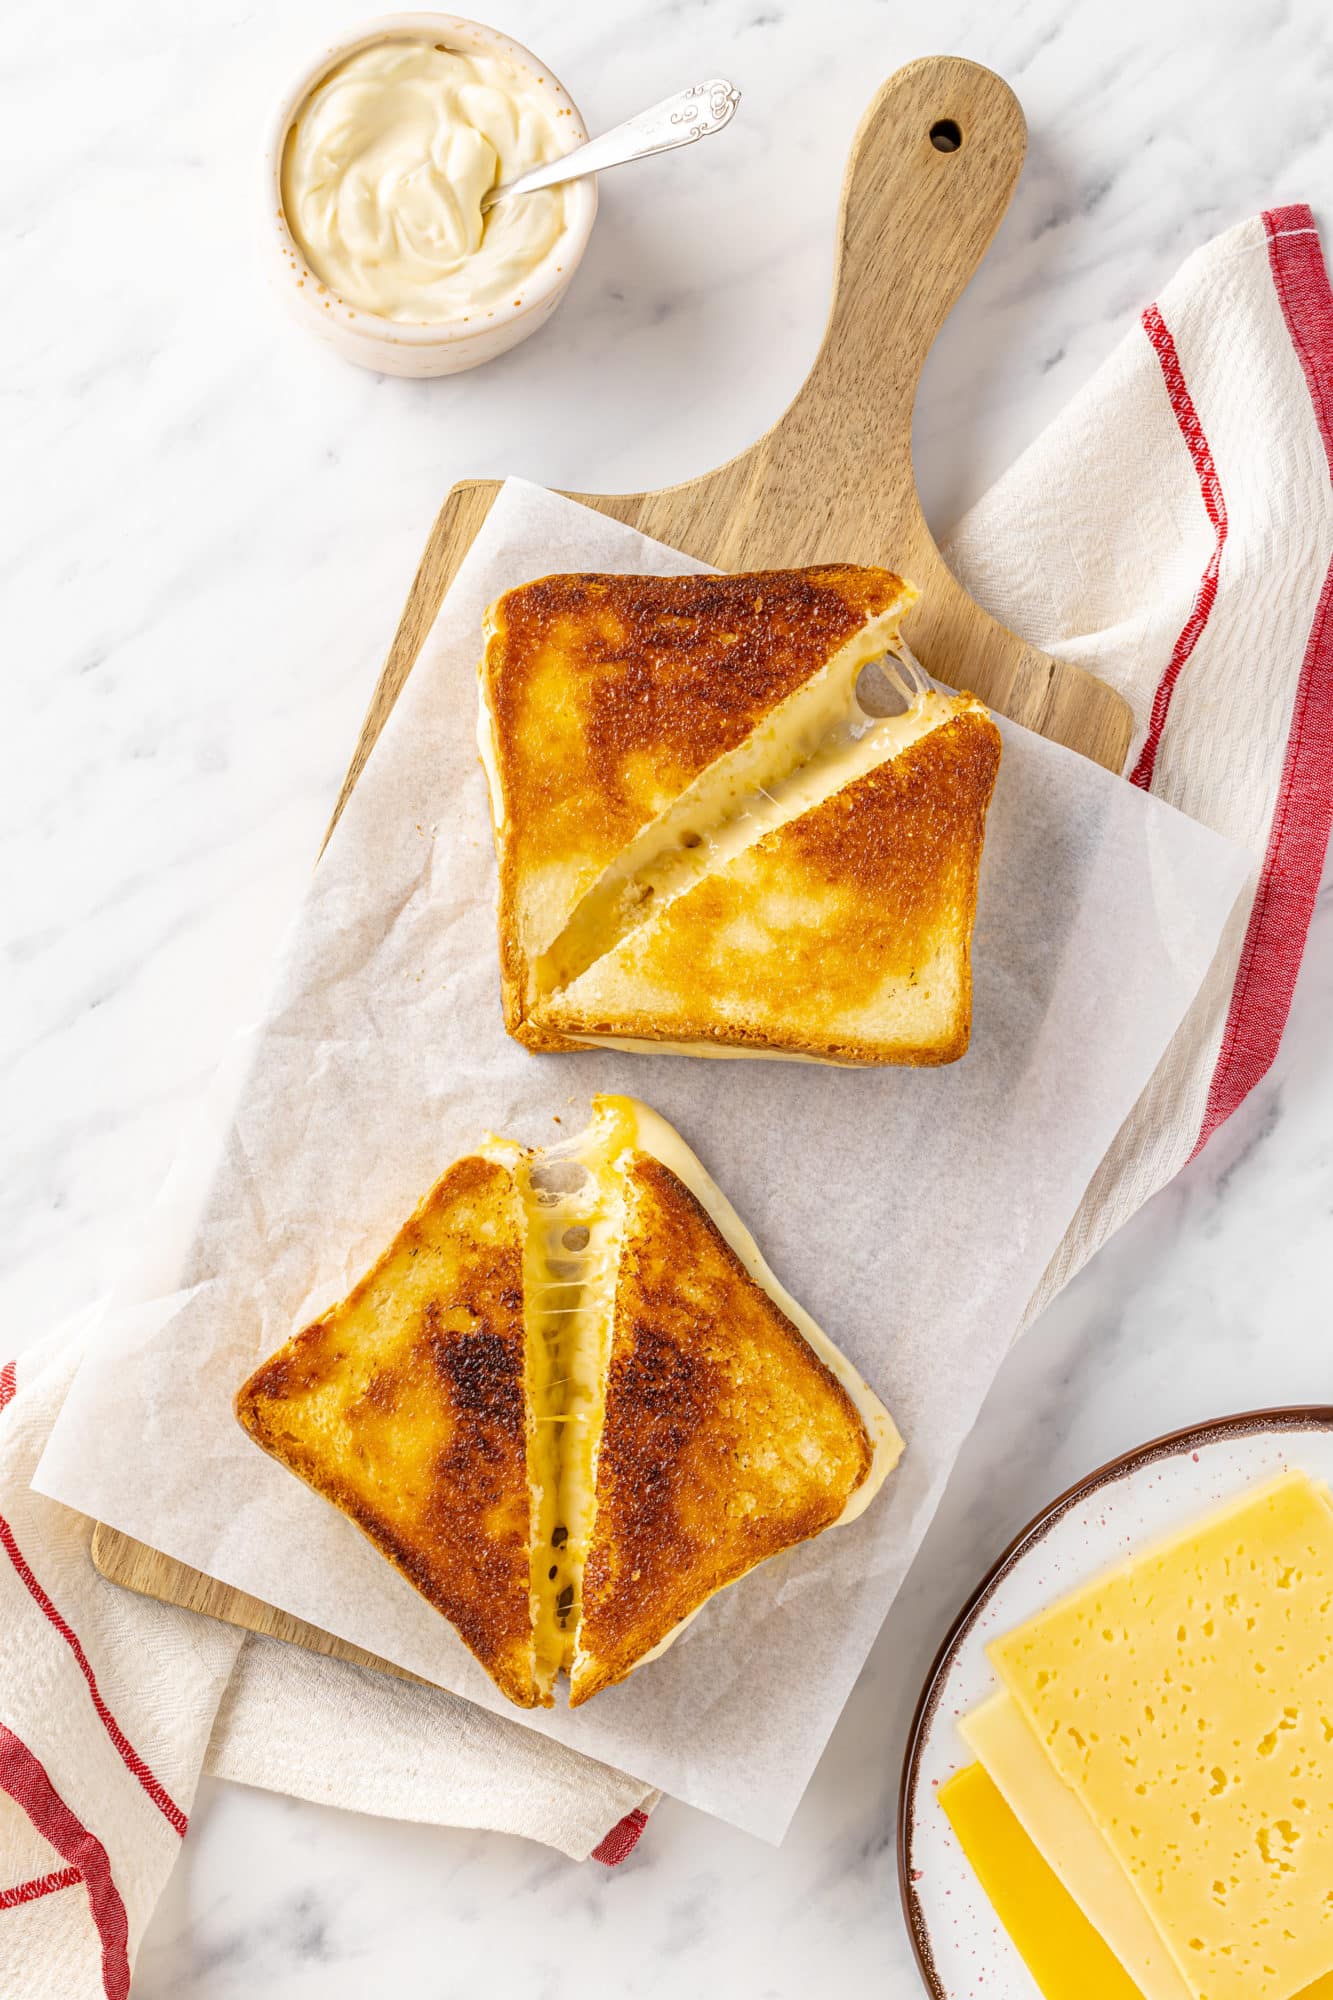 Sliced grilled cheese sandwiches on parchment paper.